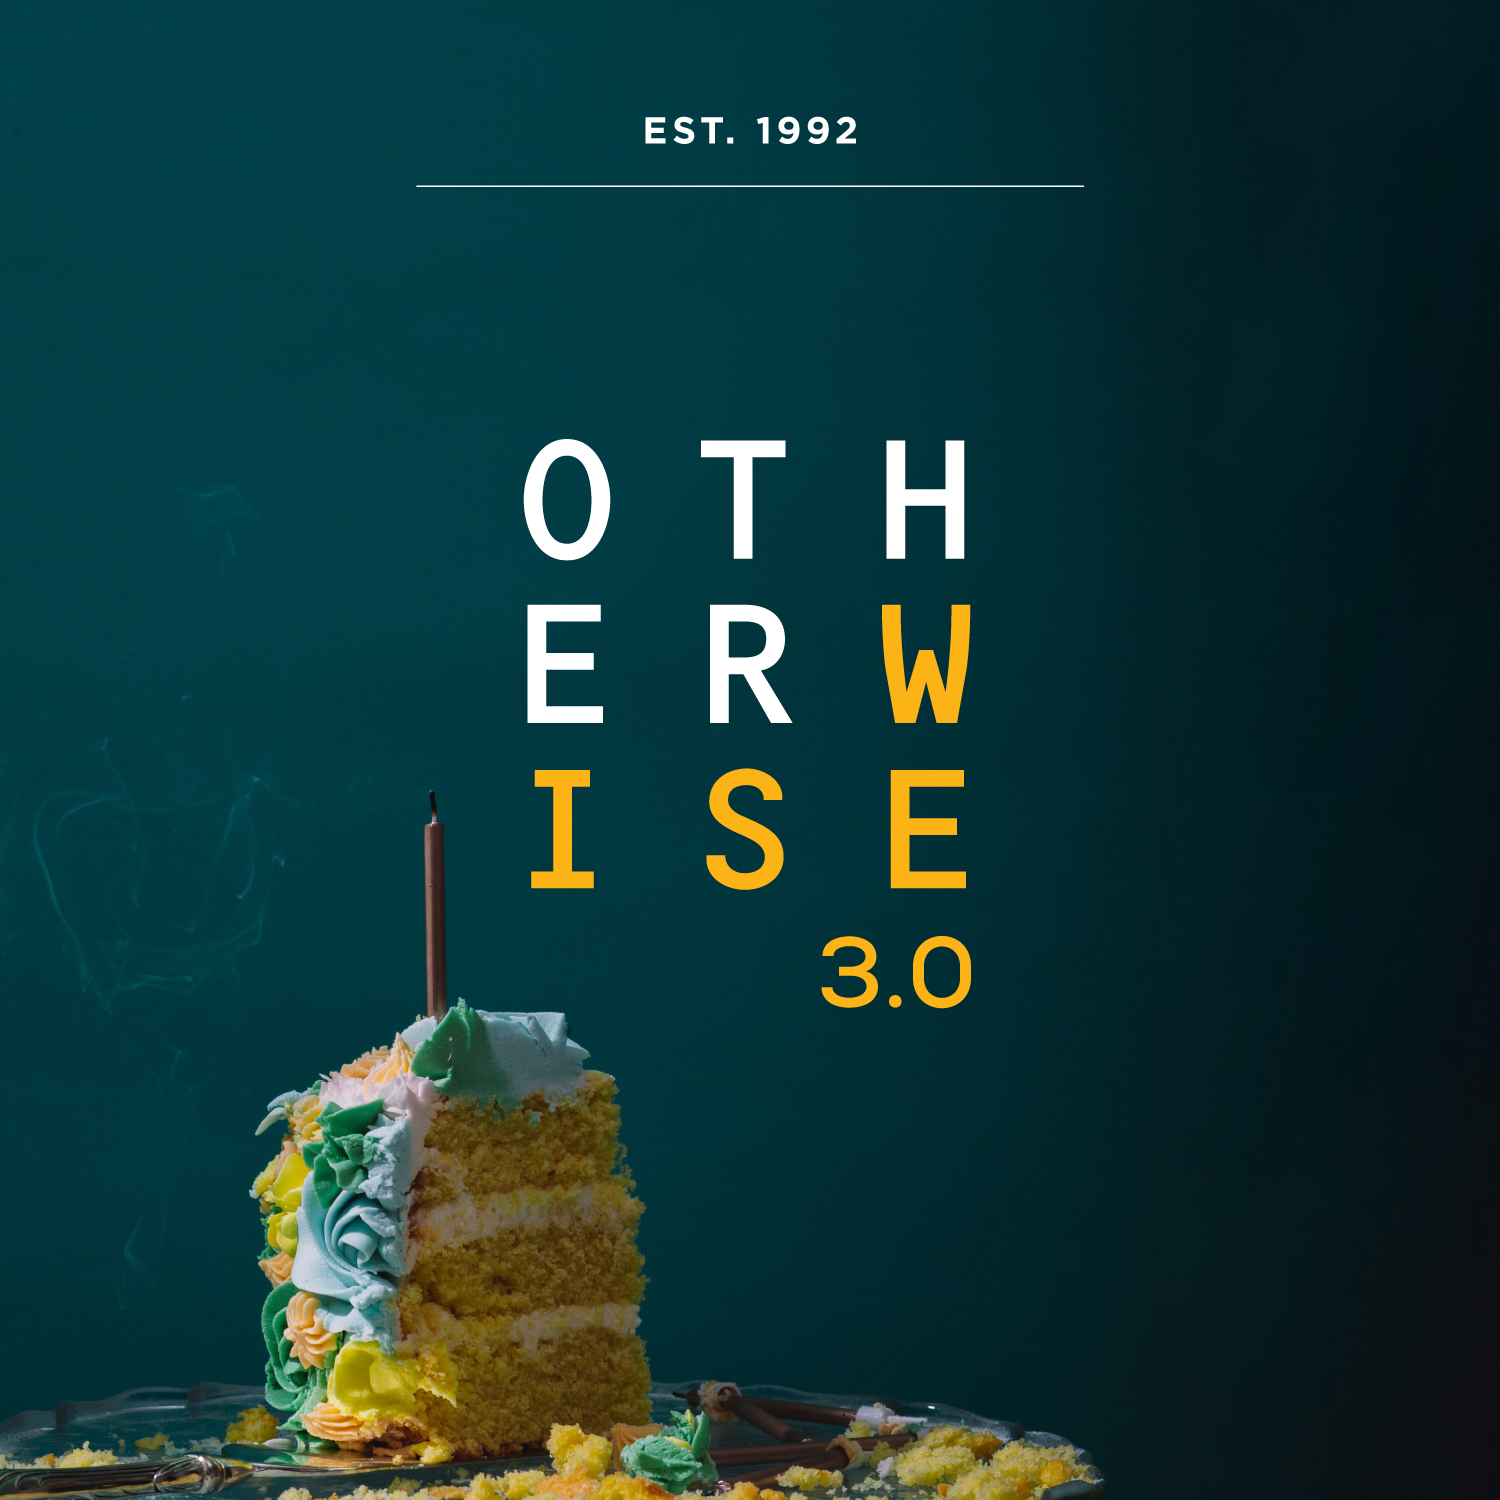 A picture of a birthday cake with white text that says Otherwise 3.0 est. 1992